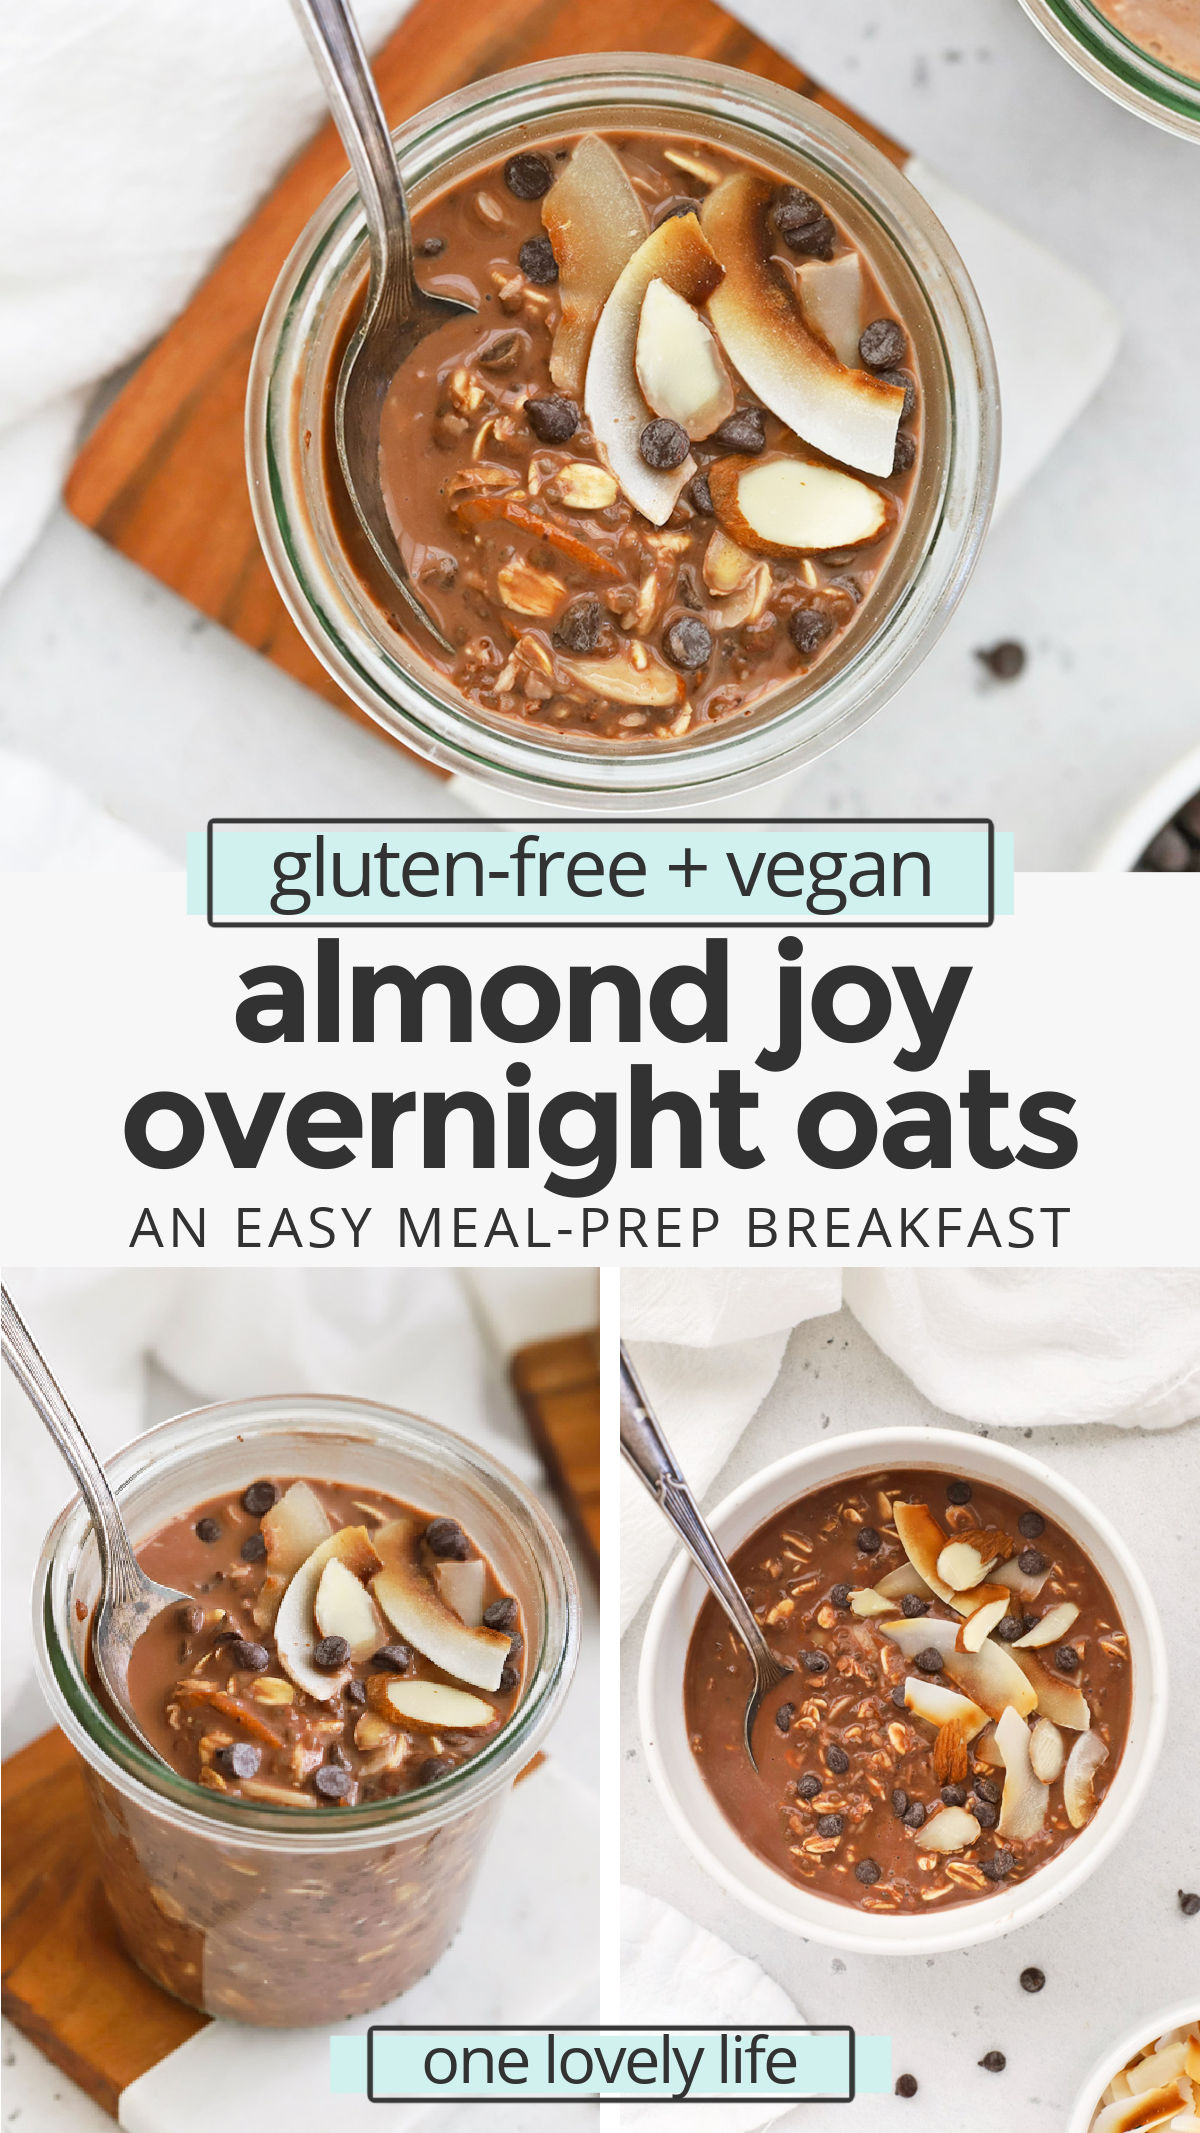 Almond Joy Overnight Oats - These creamy chocolate coconut overnight oats feel like such a treat to wake up to! (Vegan, Gluten-Free) // Healthy Breakfast // Vegan Breakfast // Gluten Free Breakfast // Chocolate Overnight Oats // Vegan Overnight Oats // chocolate overnight oats recipe